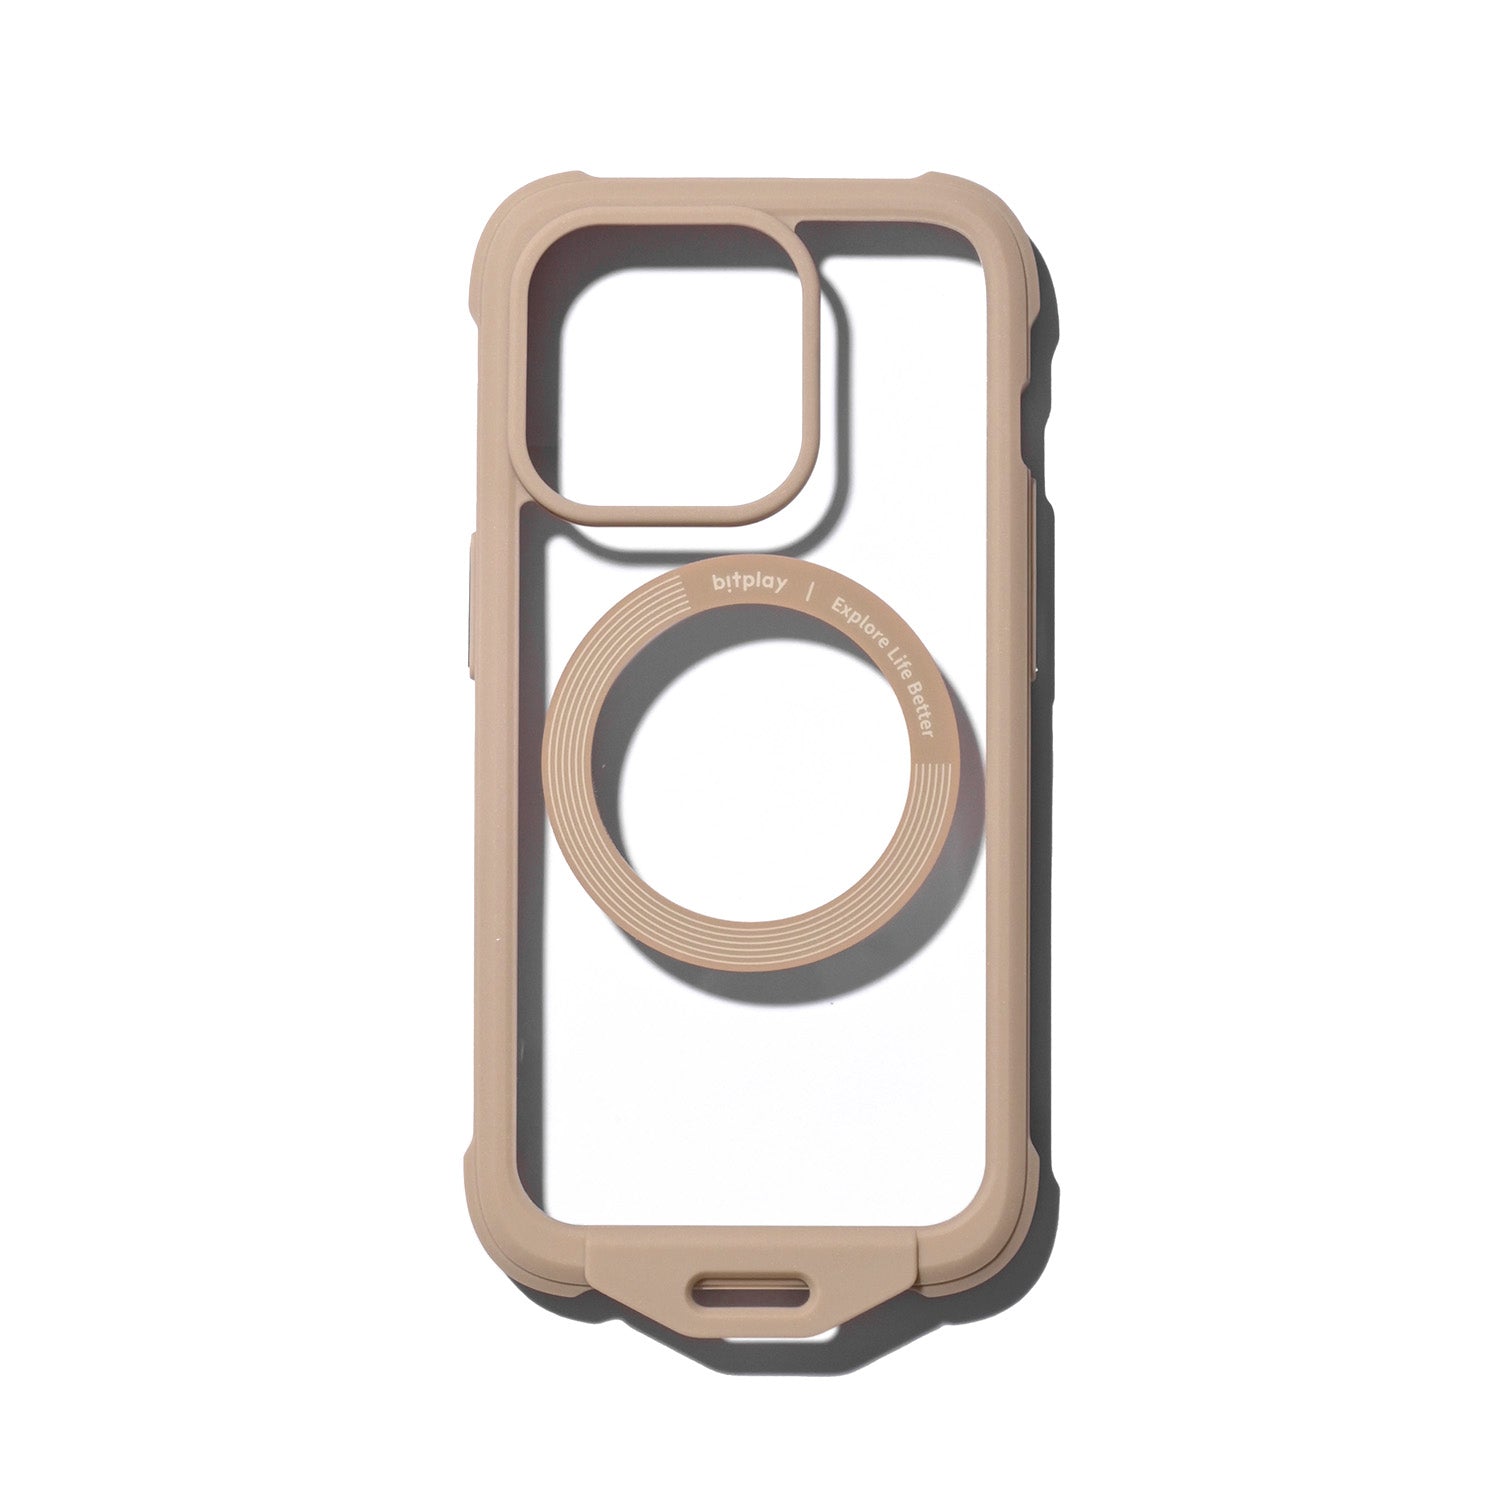 Wander Case 隨行殼 for iPhone 15 系列 奶茶色